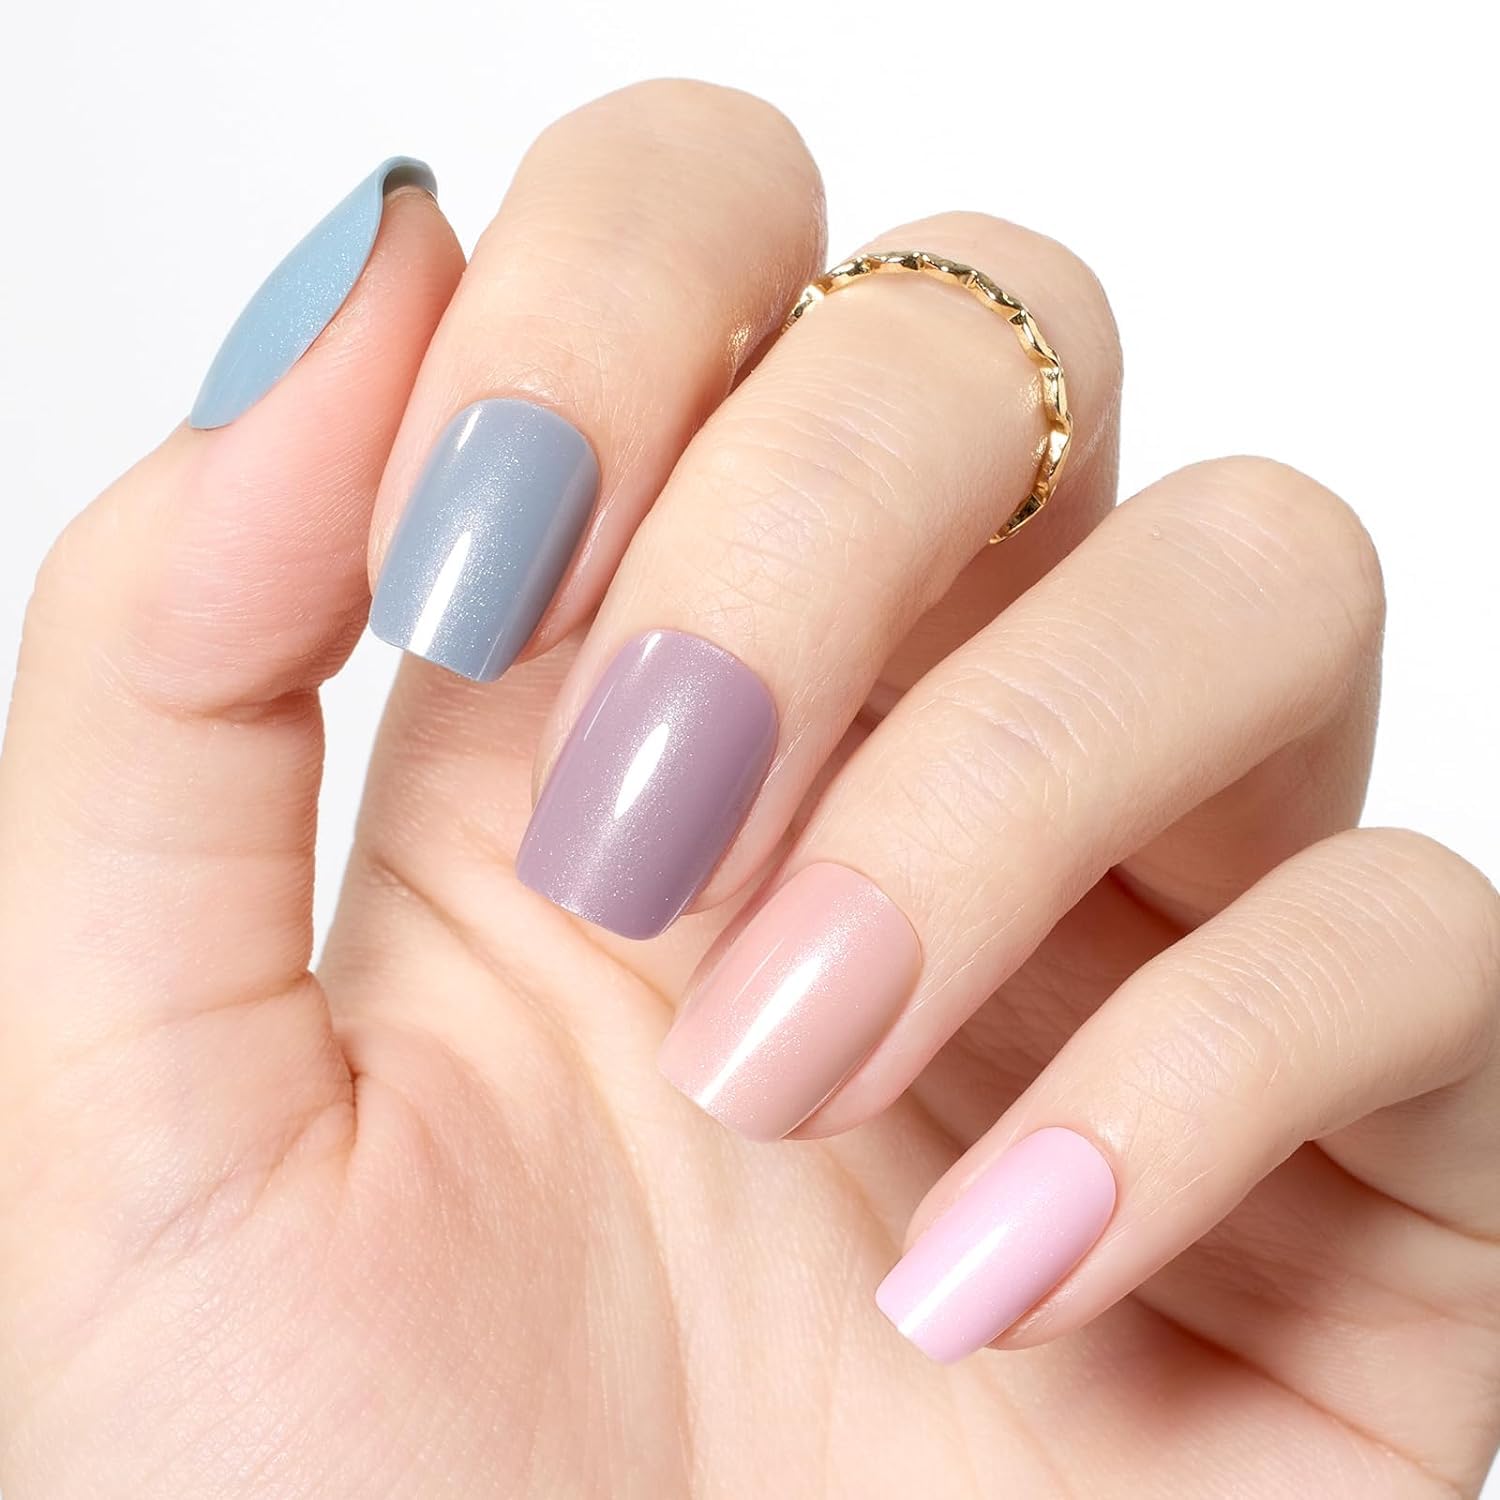 6 Colors Nude Pink Blue Short Square Press On Nails 168 Pcs in 6 Colors